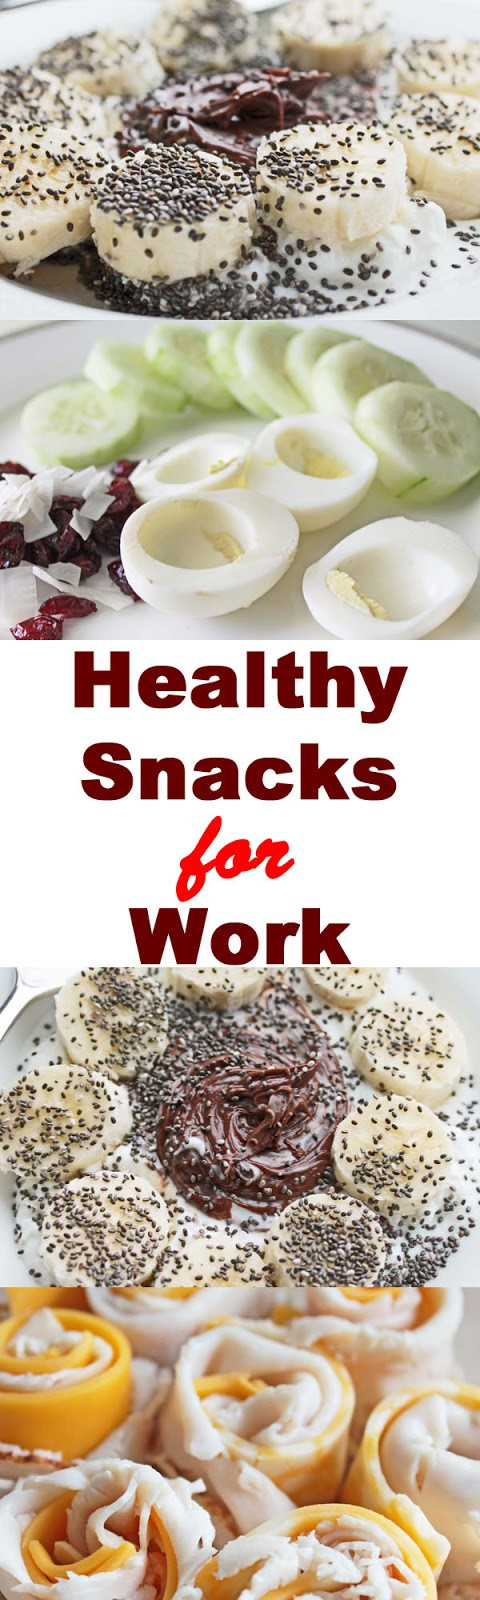 Homemade Healthy Snacks For Adults
 Healthy Snacks for Work Daily Re mendations 13